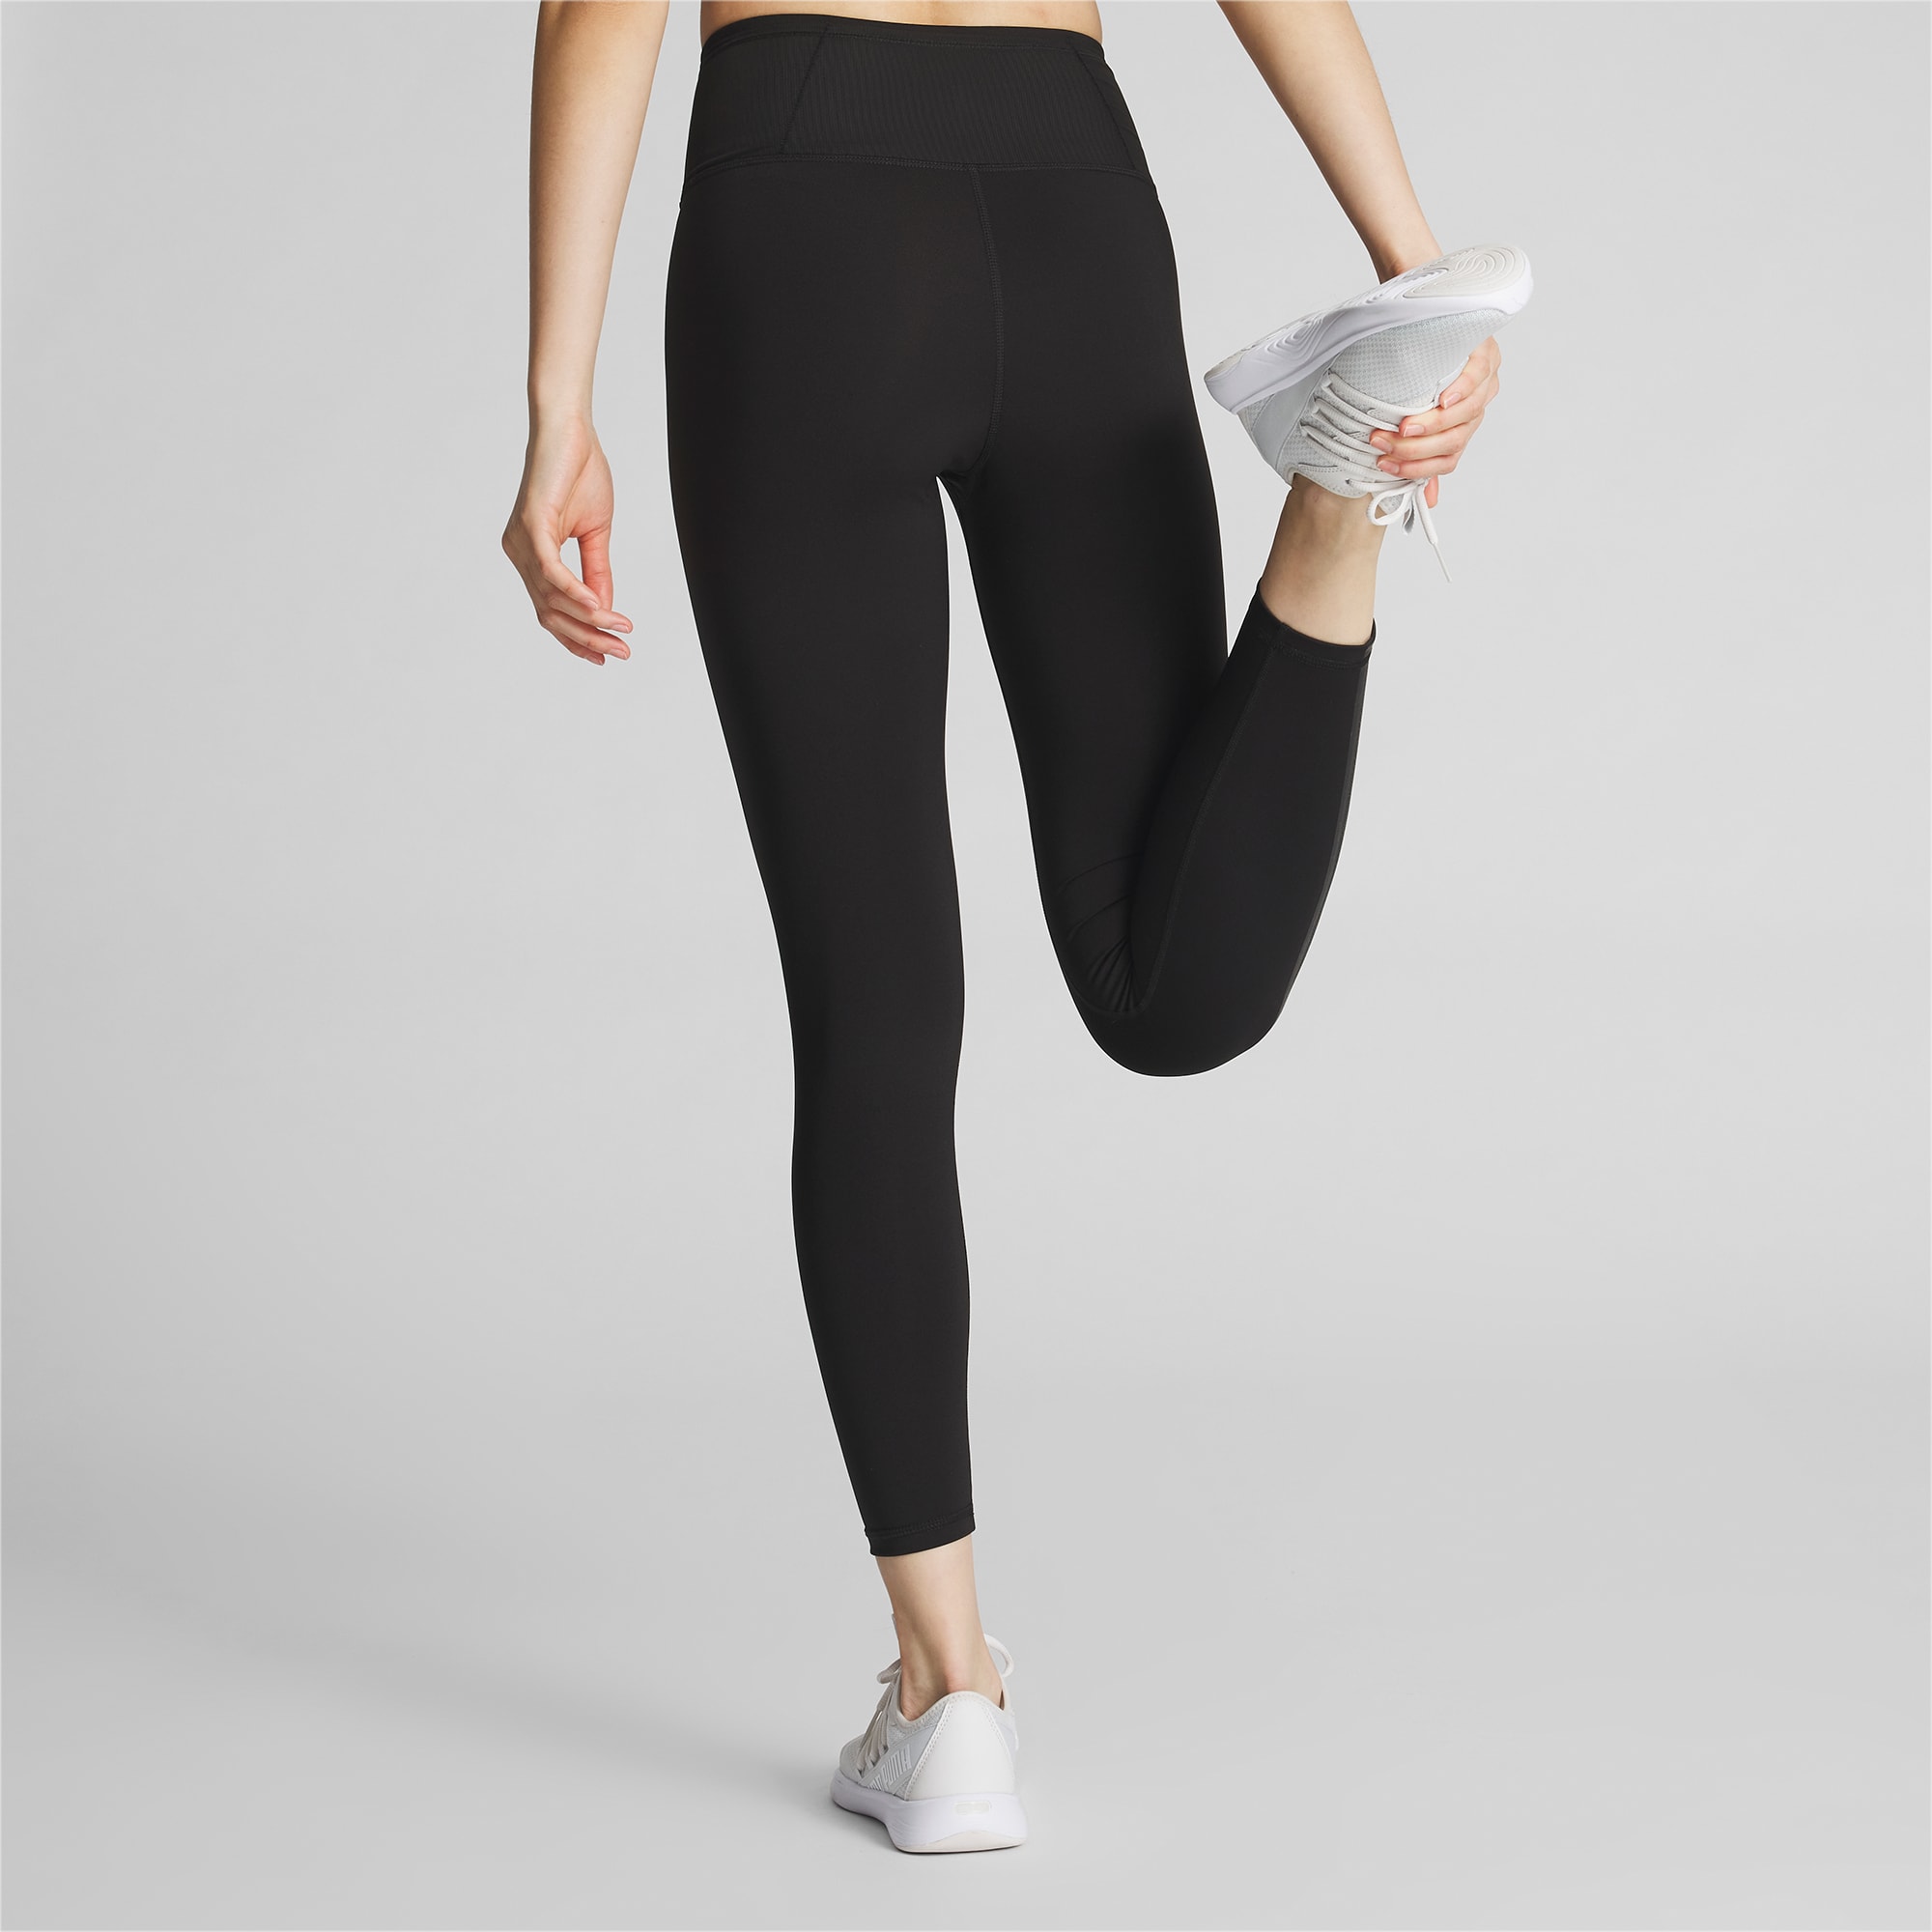 PUMA Brushed Ultraform High-Waisted All Over Print Run Tights